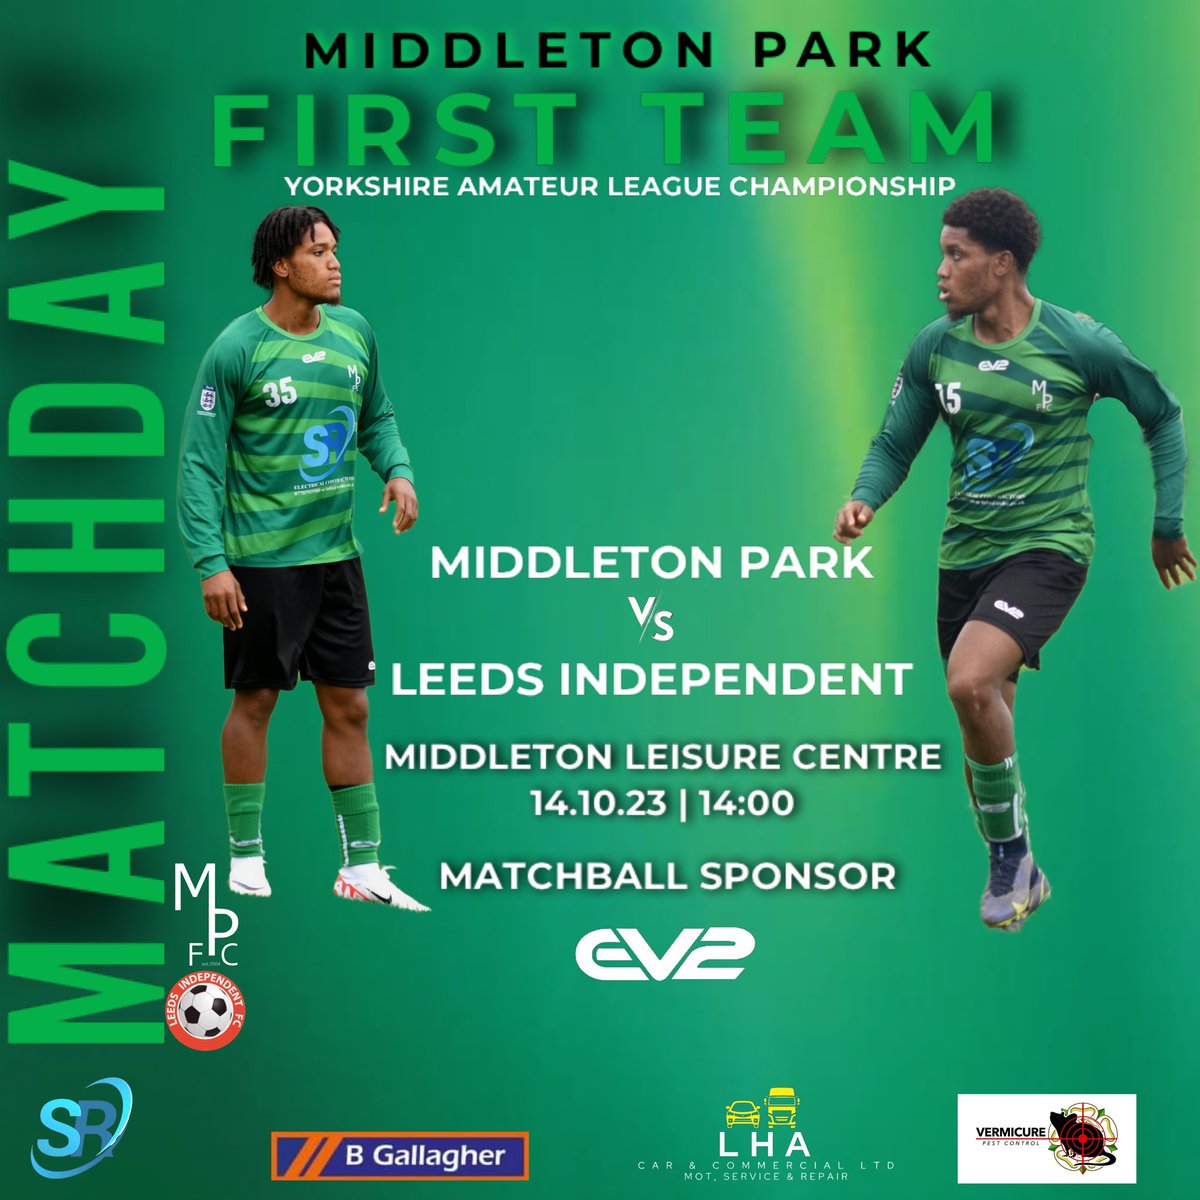 𝗠𝗔𝗧𝗖𝗛𝗗𝗔𝗬 The first team host Leeds Independent in the league this afternoon. Come down and support the lads!!! 💚 ⌚️| kick-off: 14:00 📍| Middleton Leisure Centre, LS10 4AX